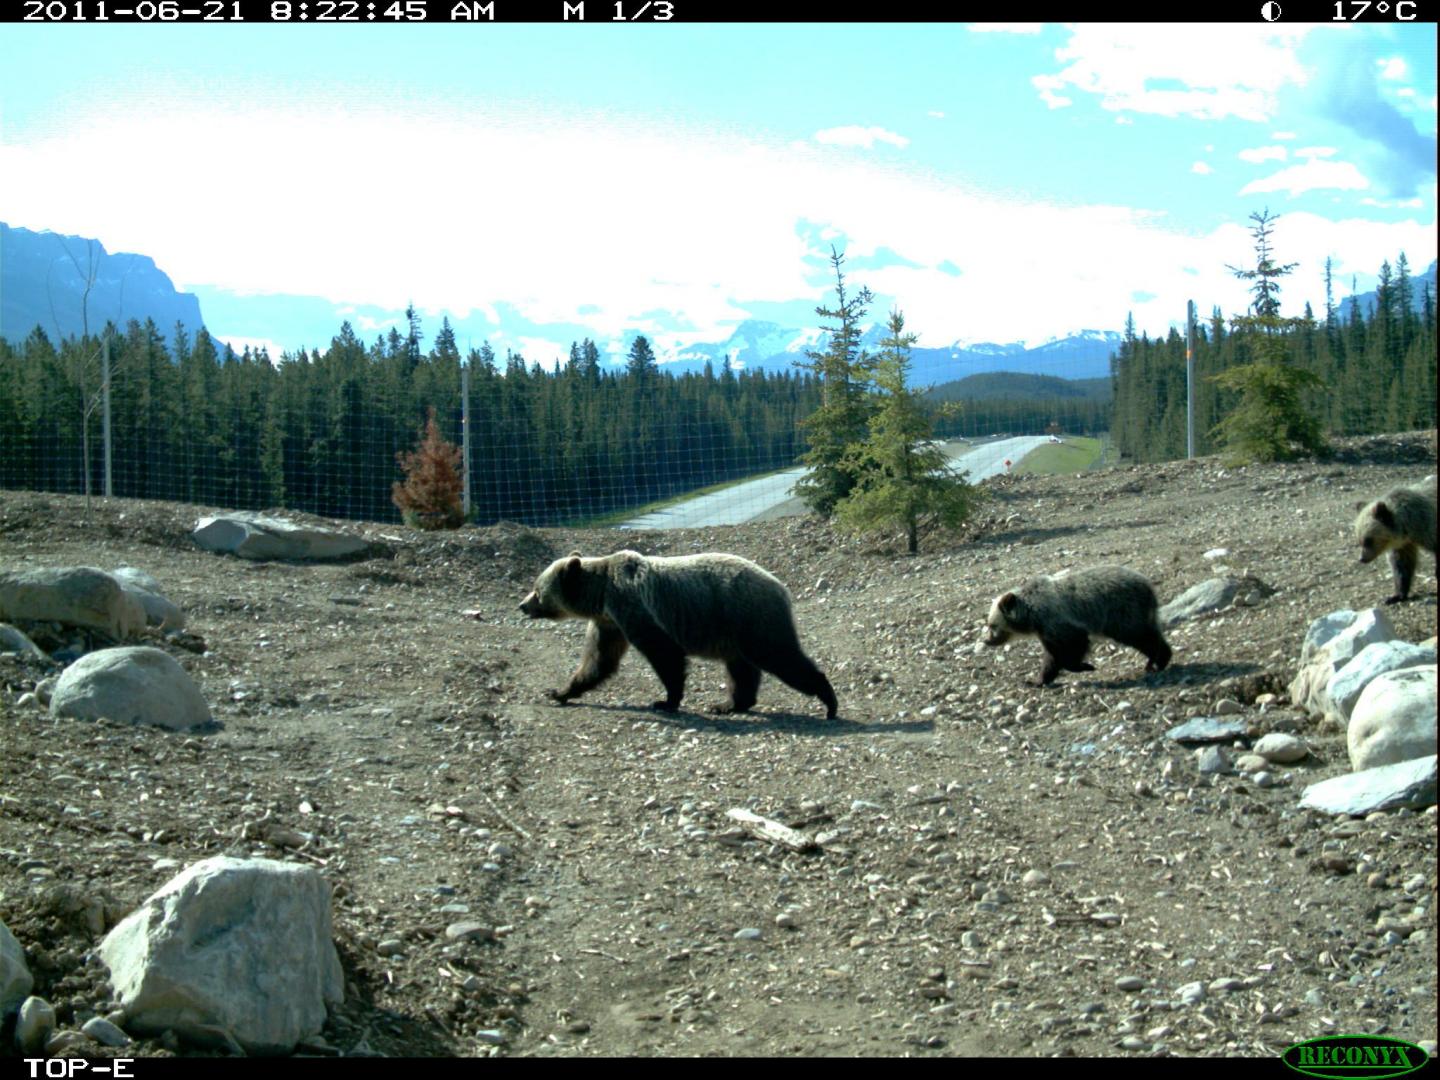 UBC Study Finds Family-friendly Overpasses are Needed to Help Grizzly Bears